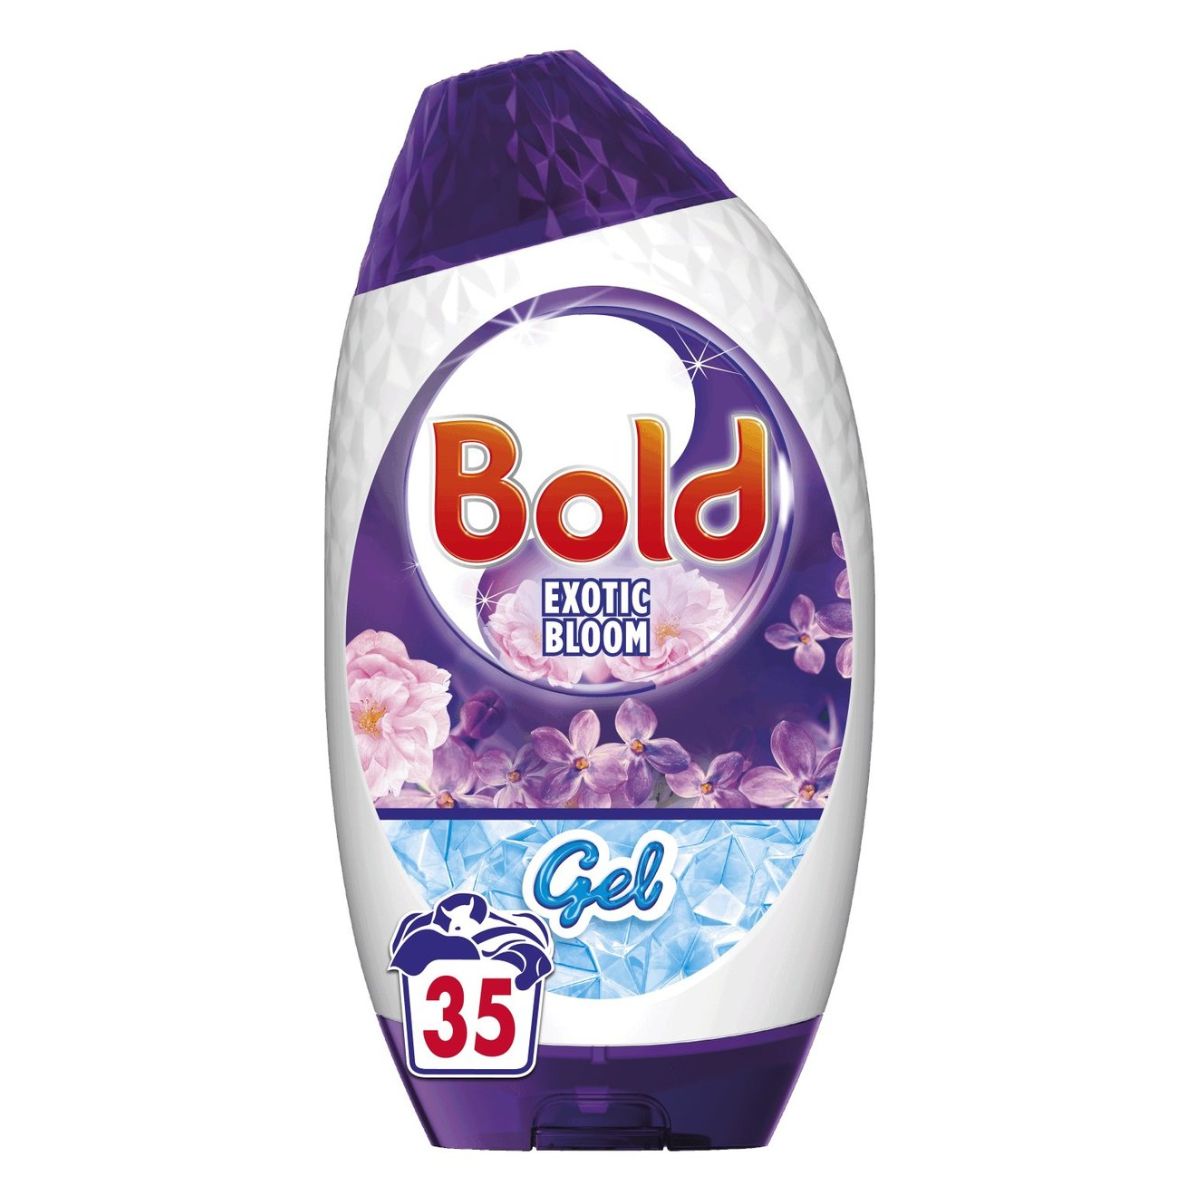 Bold 2in1 Washing Liquid Gel Exotic Bloom with flowers on a white background.